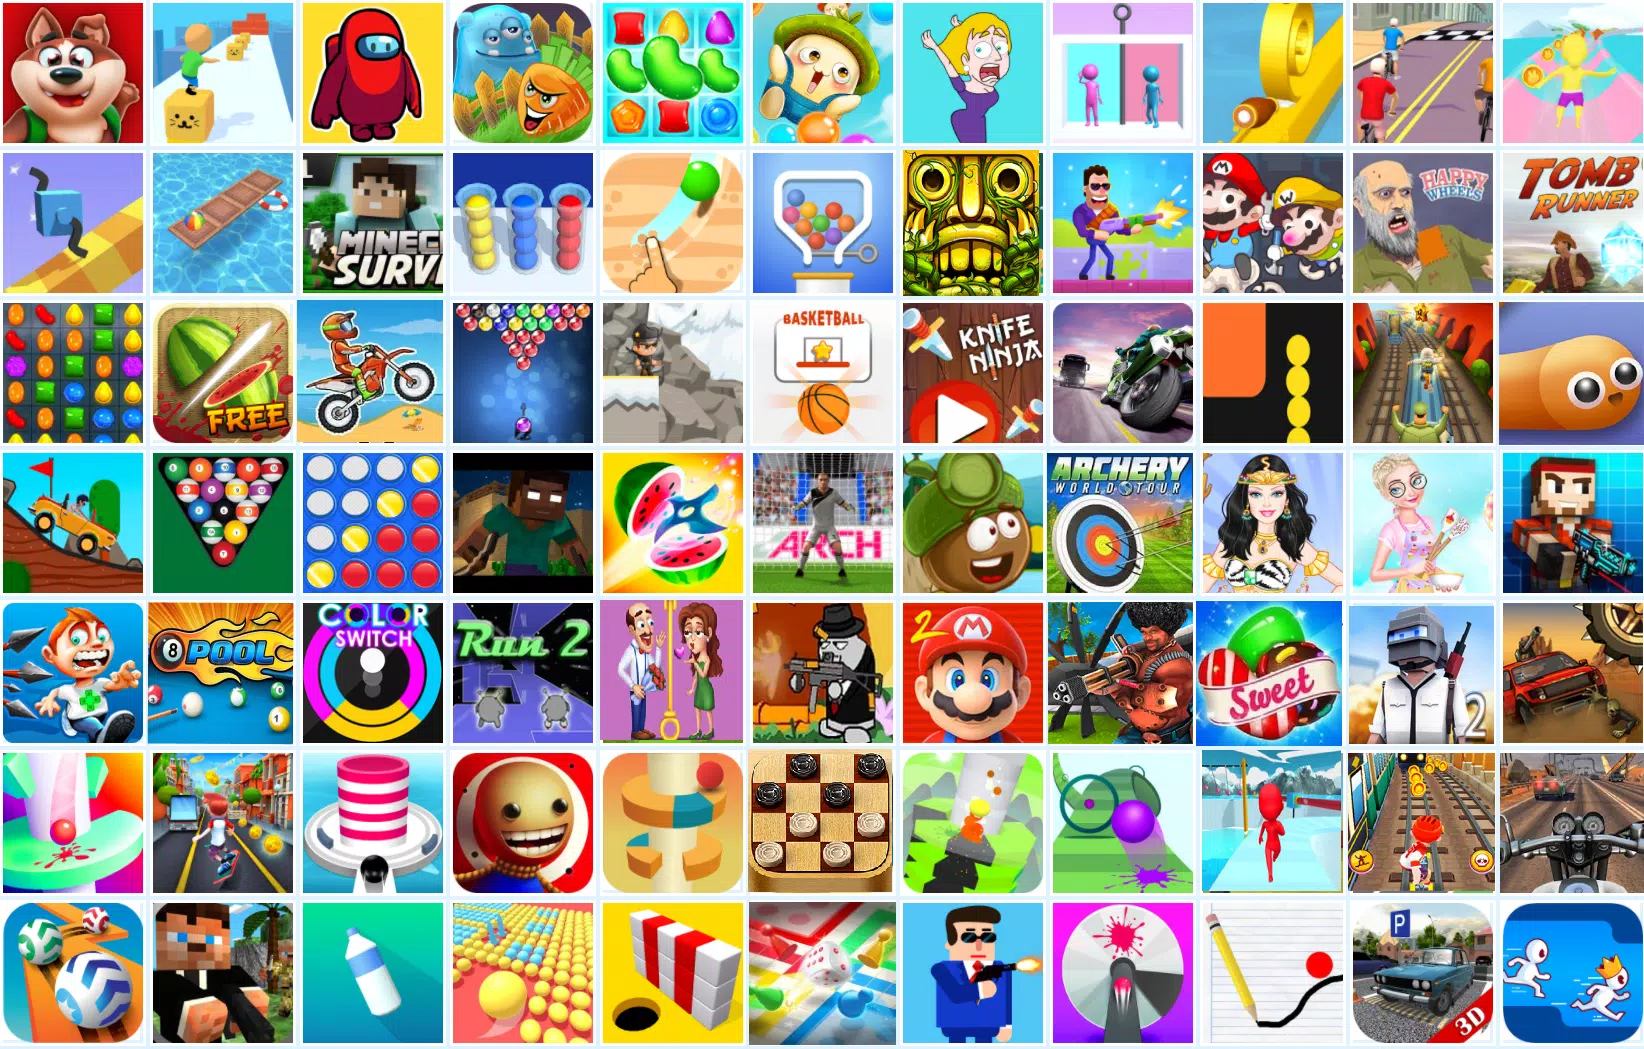 Funny Game Apk 2022 Download For Android [Play & Earn]